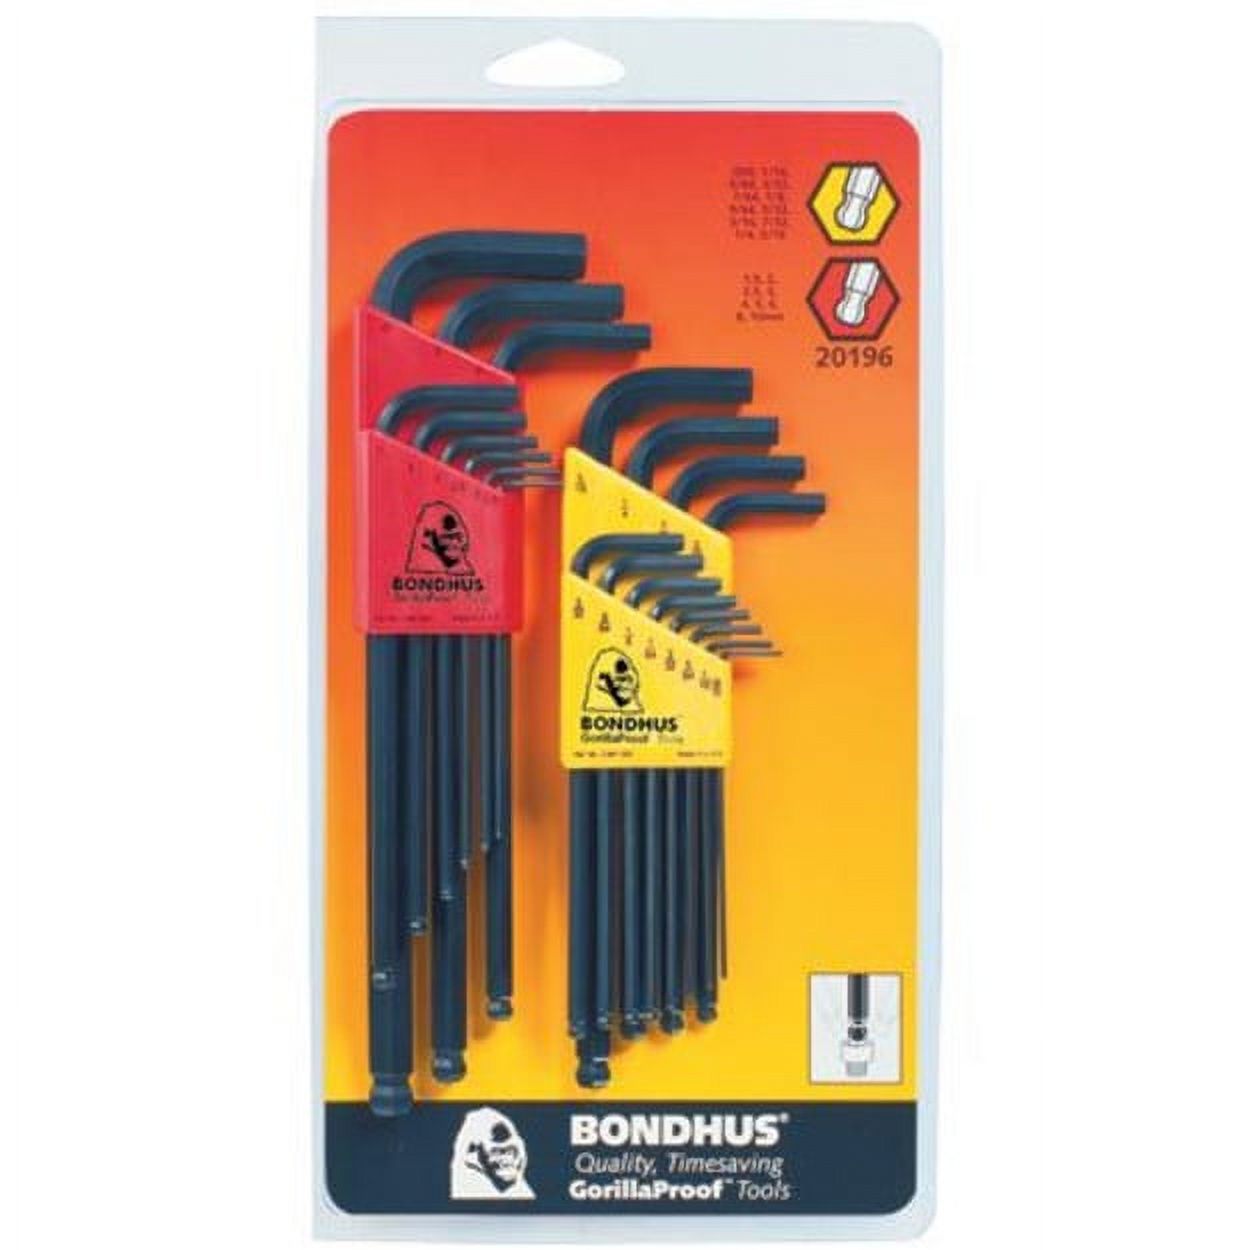 Bondhus Inch/metric Ball End L-Wrench Double Pack - image 2 of 2